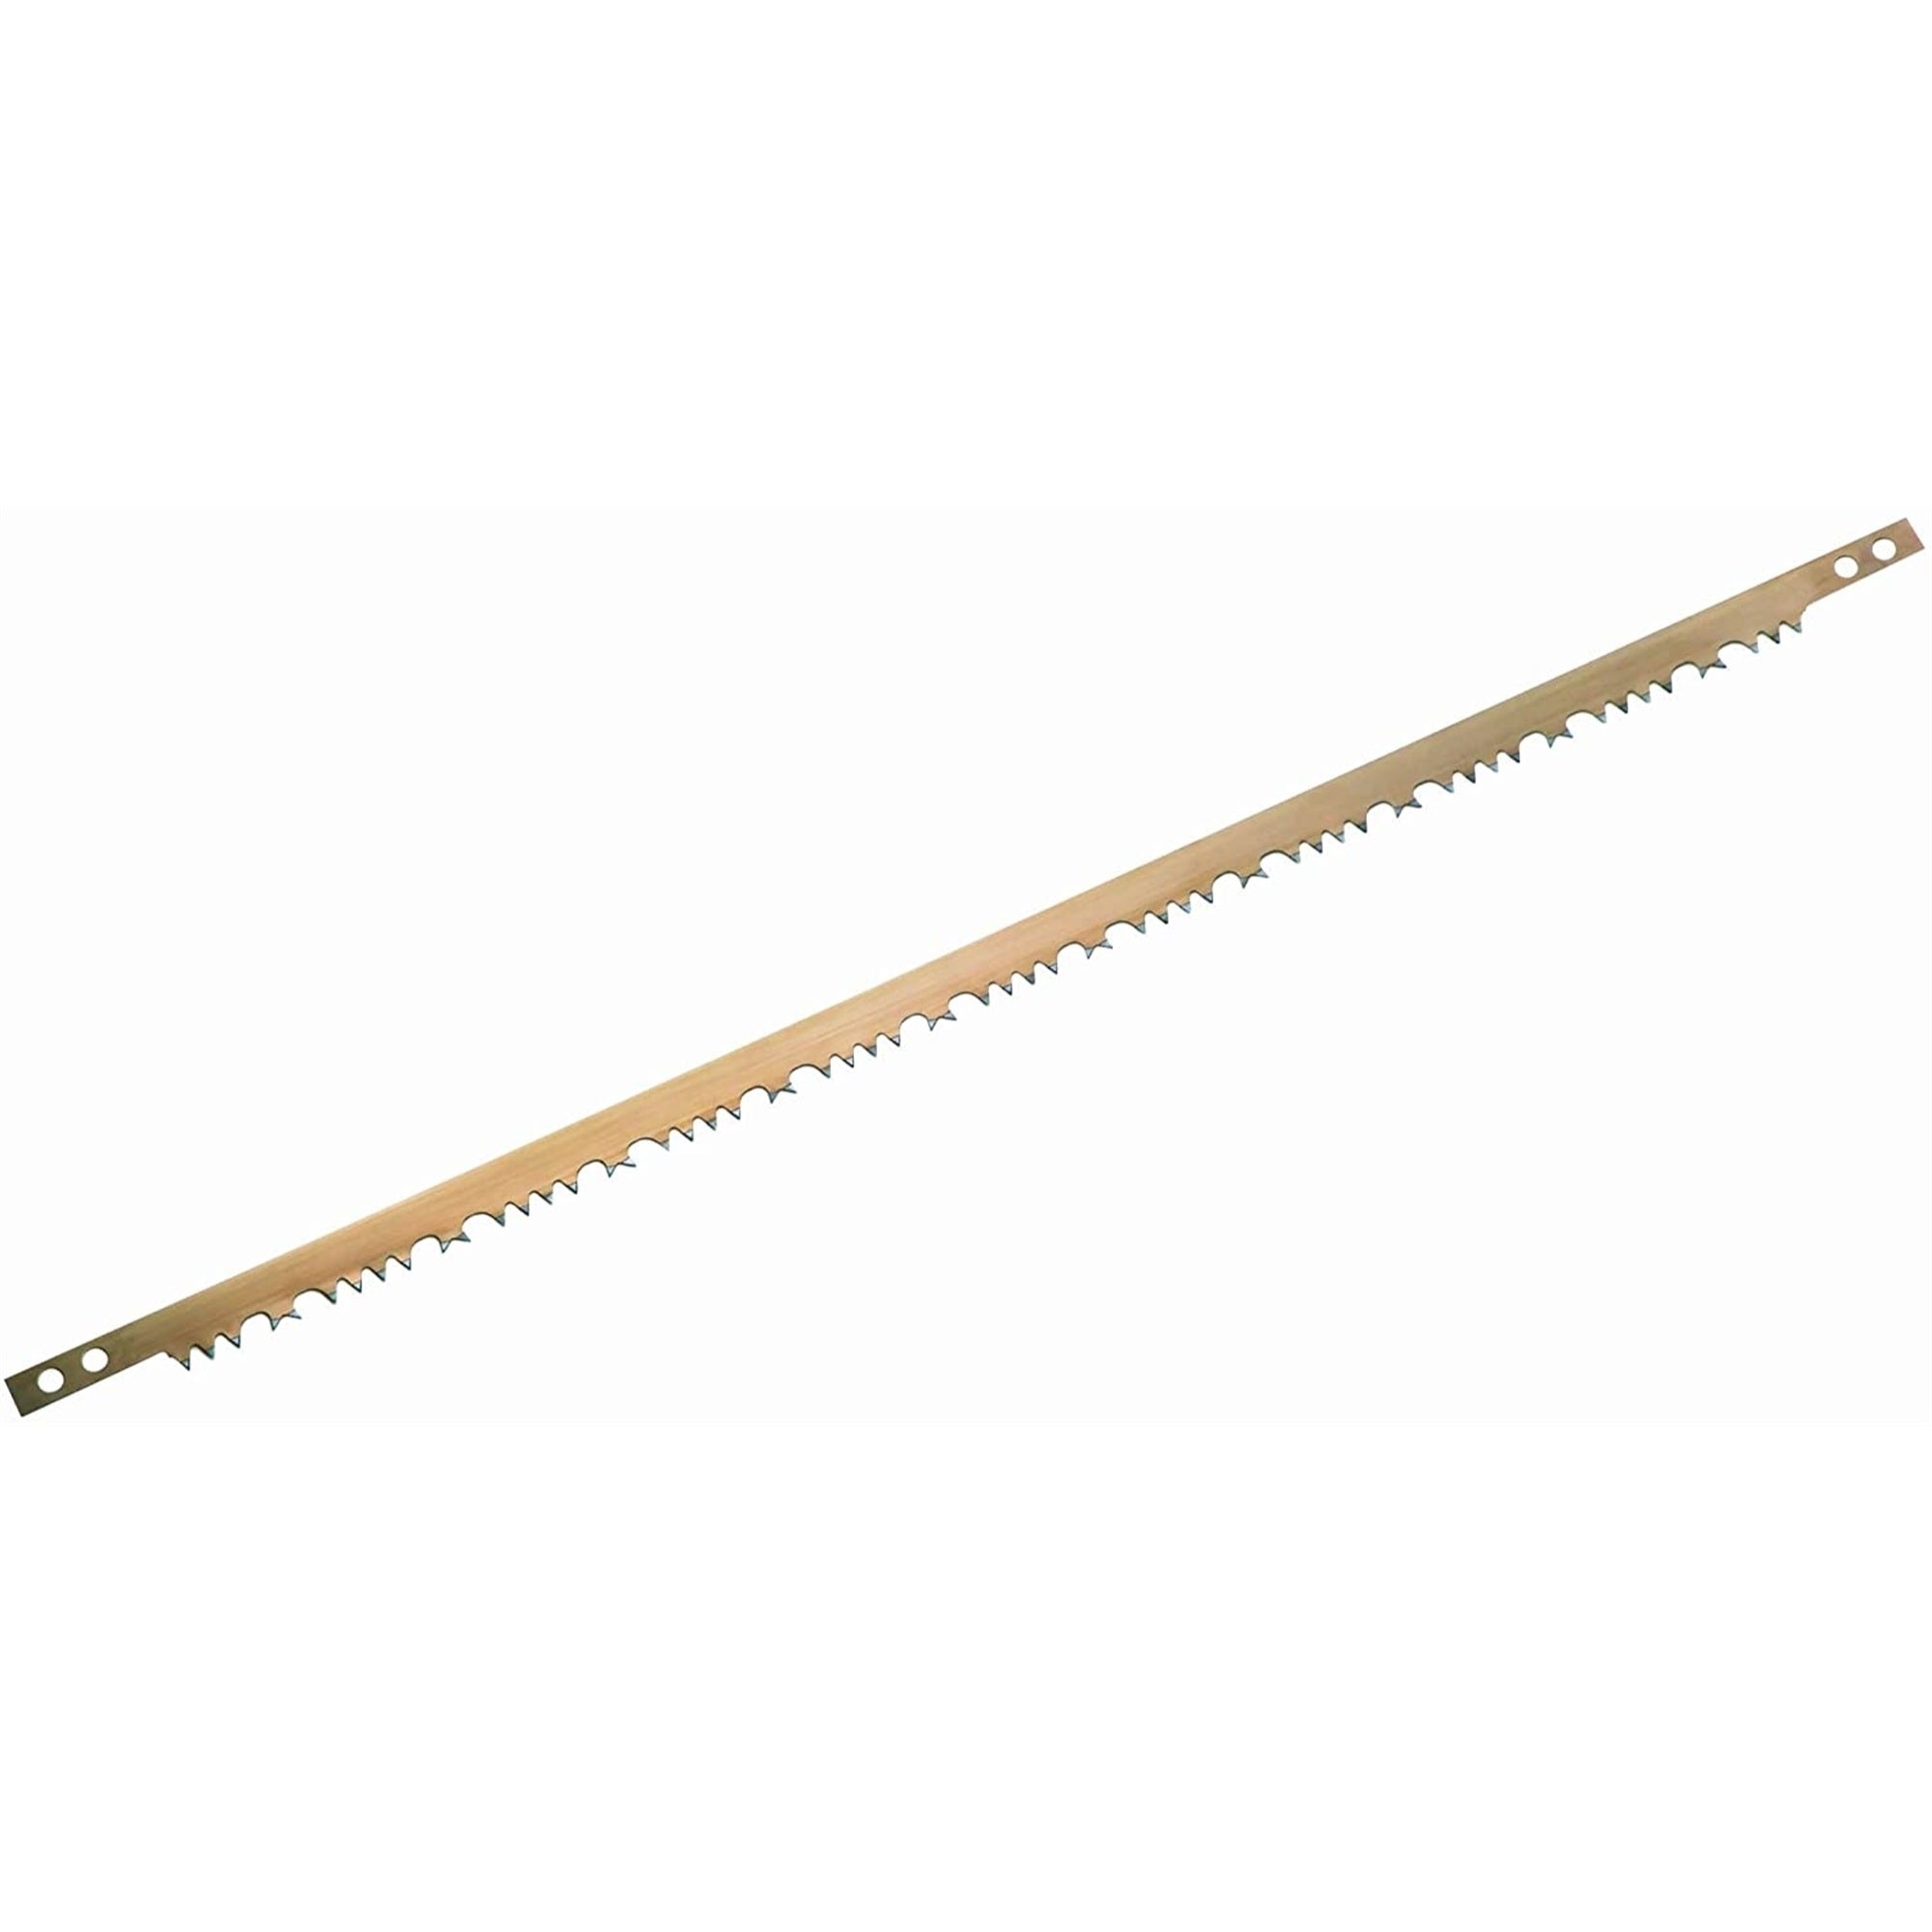 Bahco Replacement Tempered Steel Blade with Hard-point Raker Toothing Bow Saw Blade, 24"